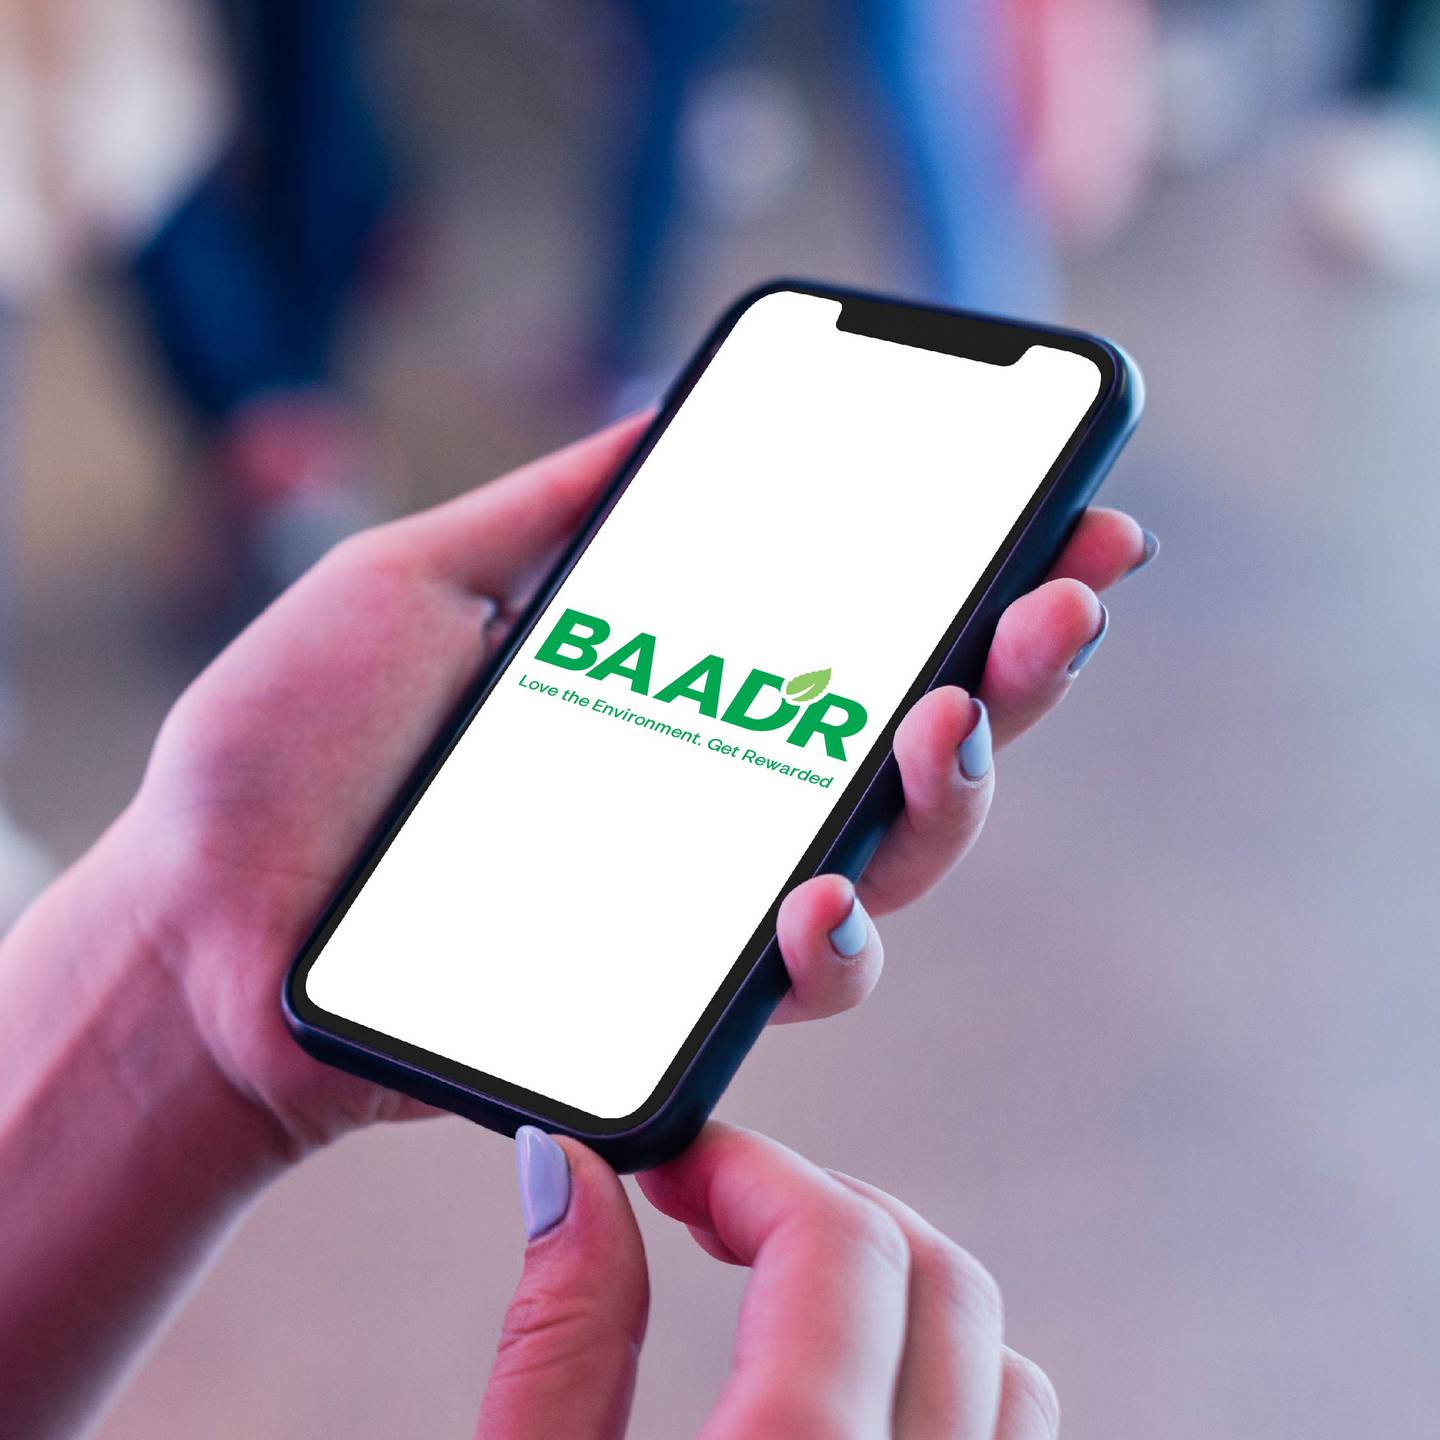 The new Baadr app aims to educate, encourage and reward users looking to shift to a more environmentally friendly way of living.